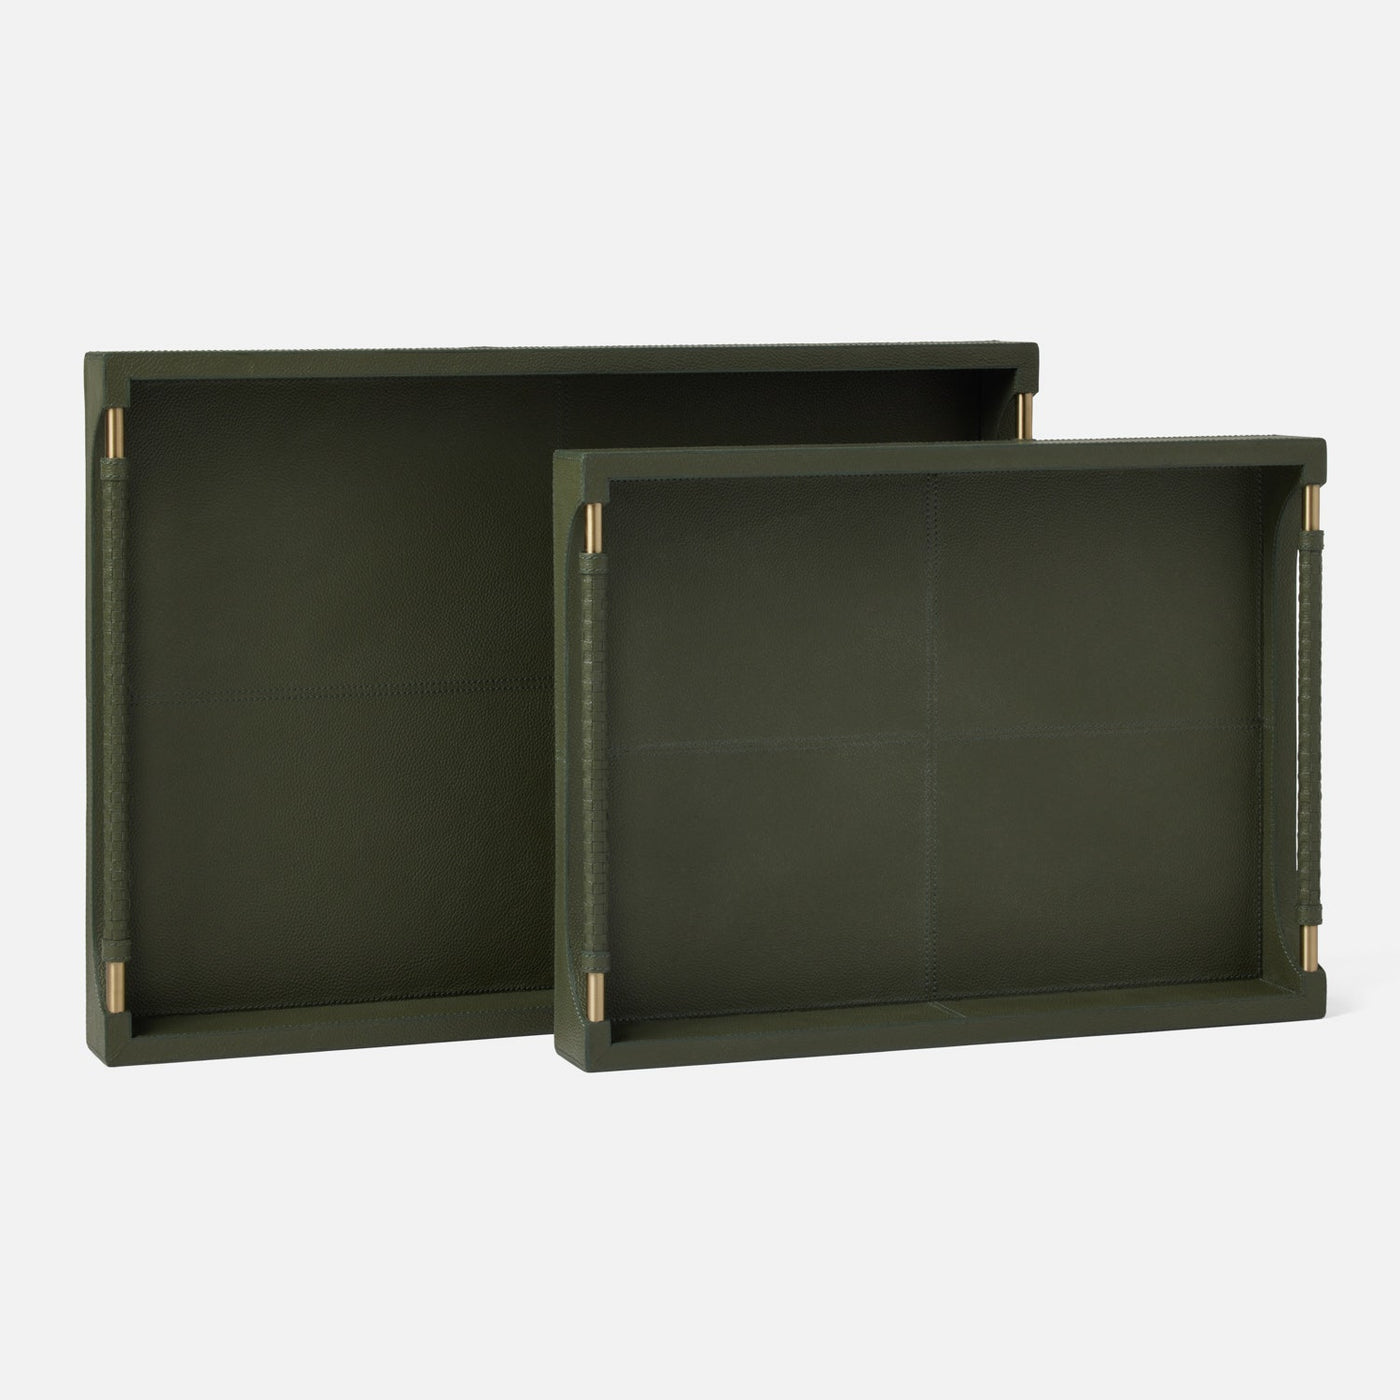 TRAY LEATHER FOREST GREEN (Available in 2 Sizes)